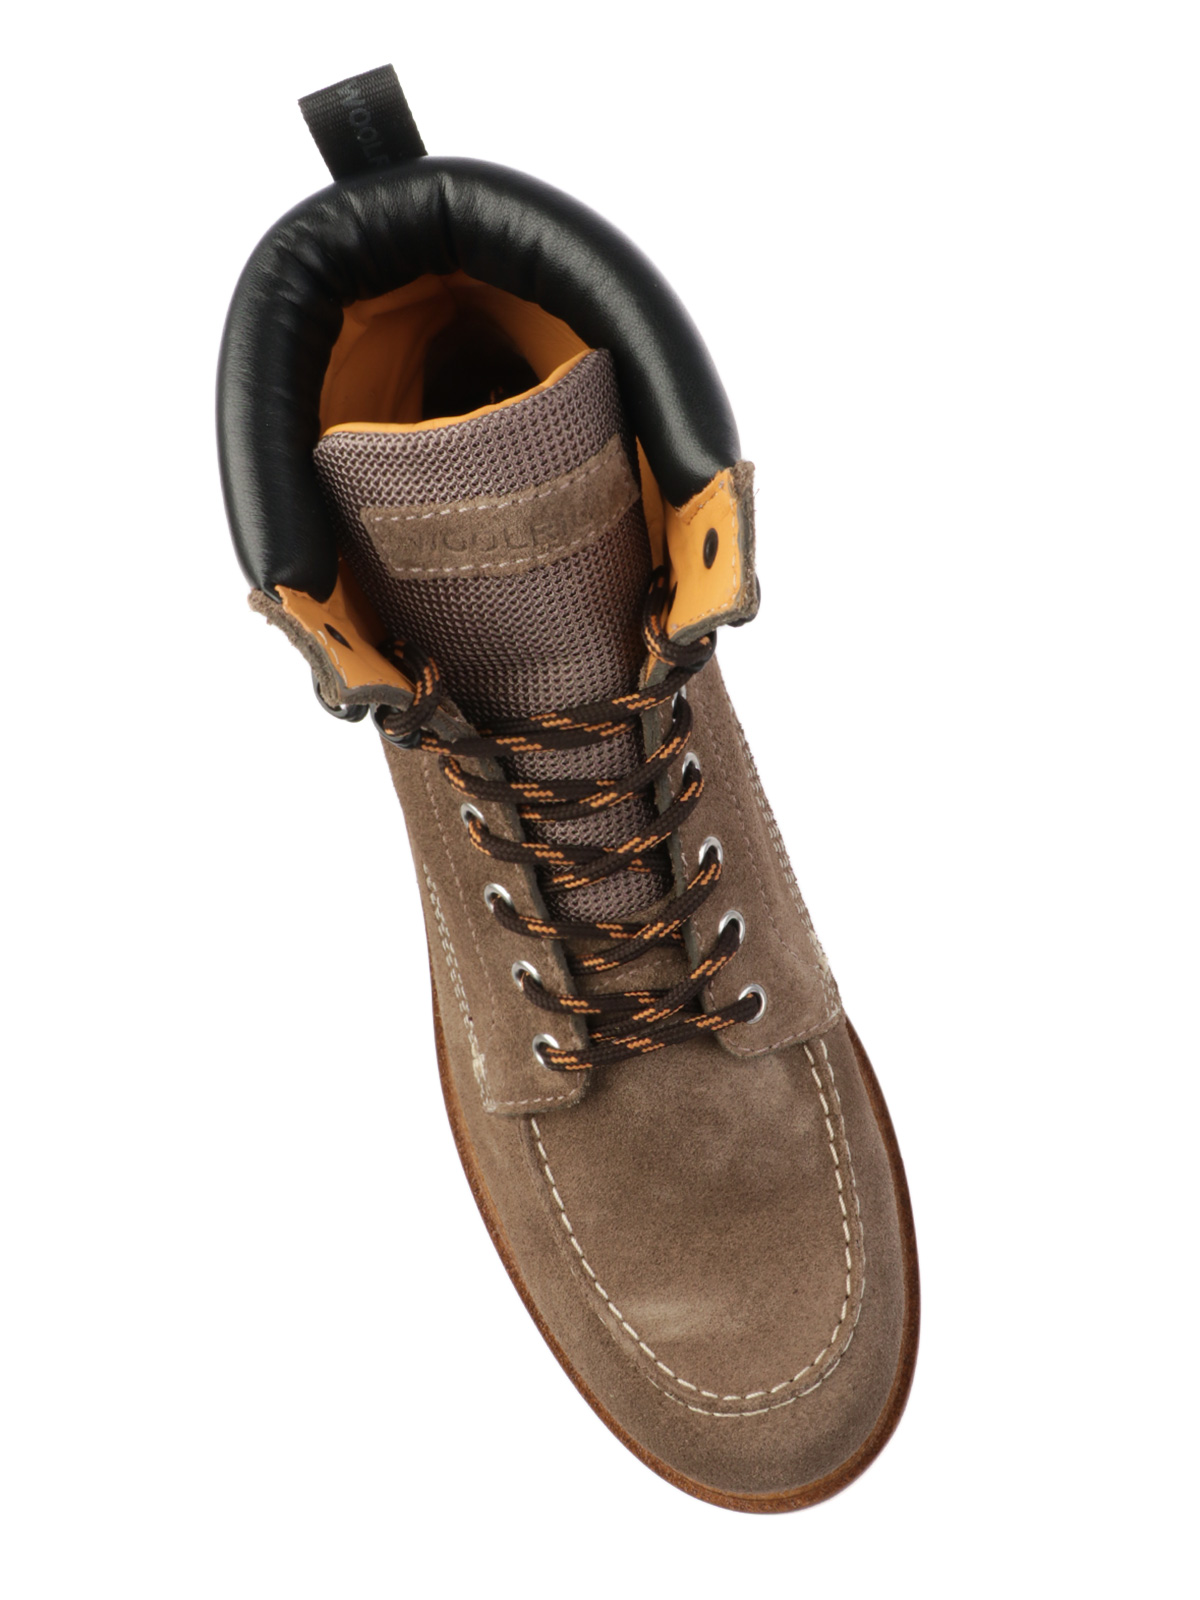 WOOLRICH Stivaletti Uomo Moc Toe in Suede Taupe, WFM232.100.1010